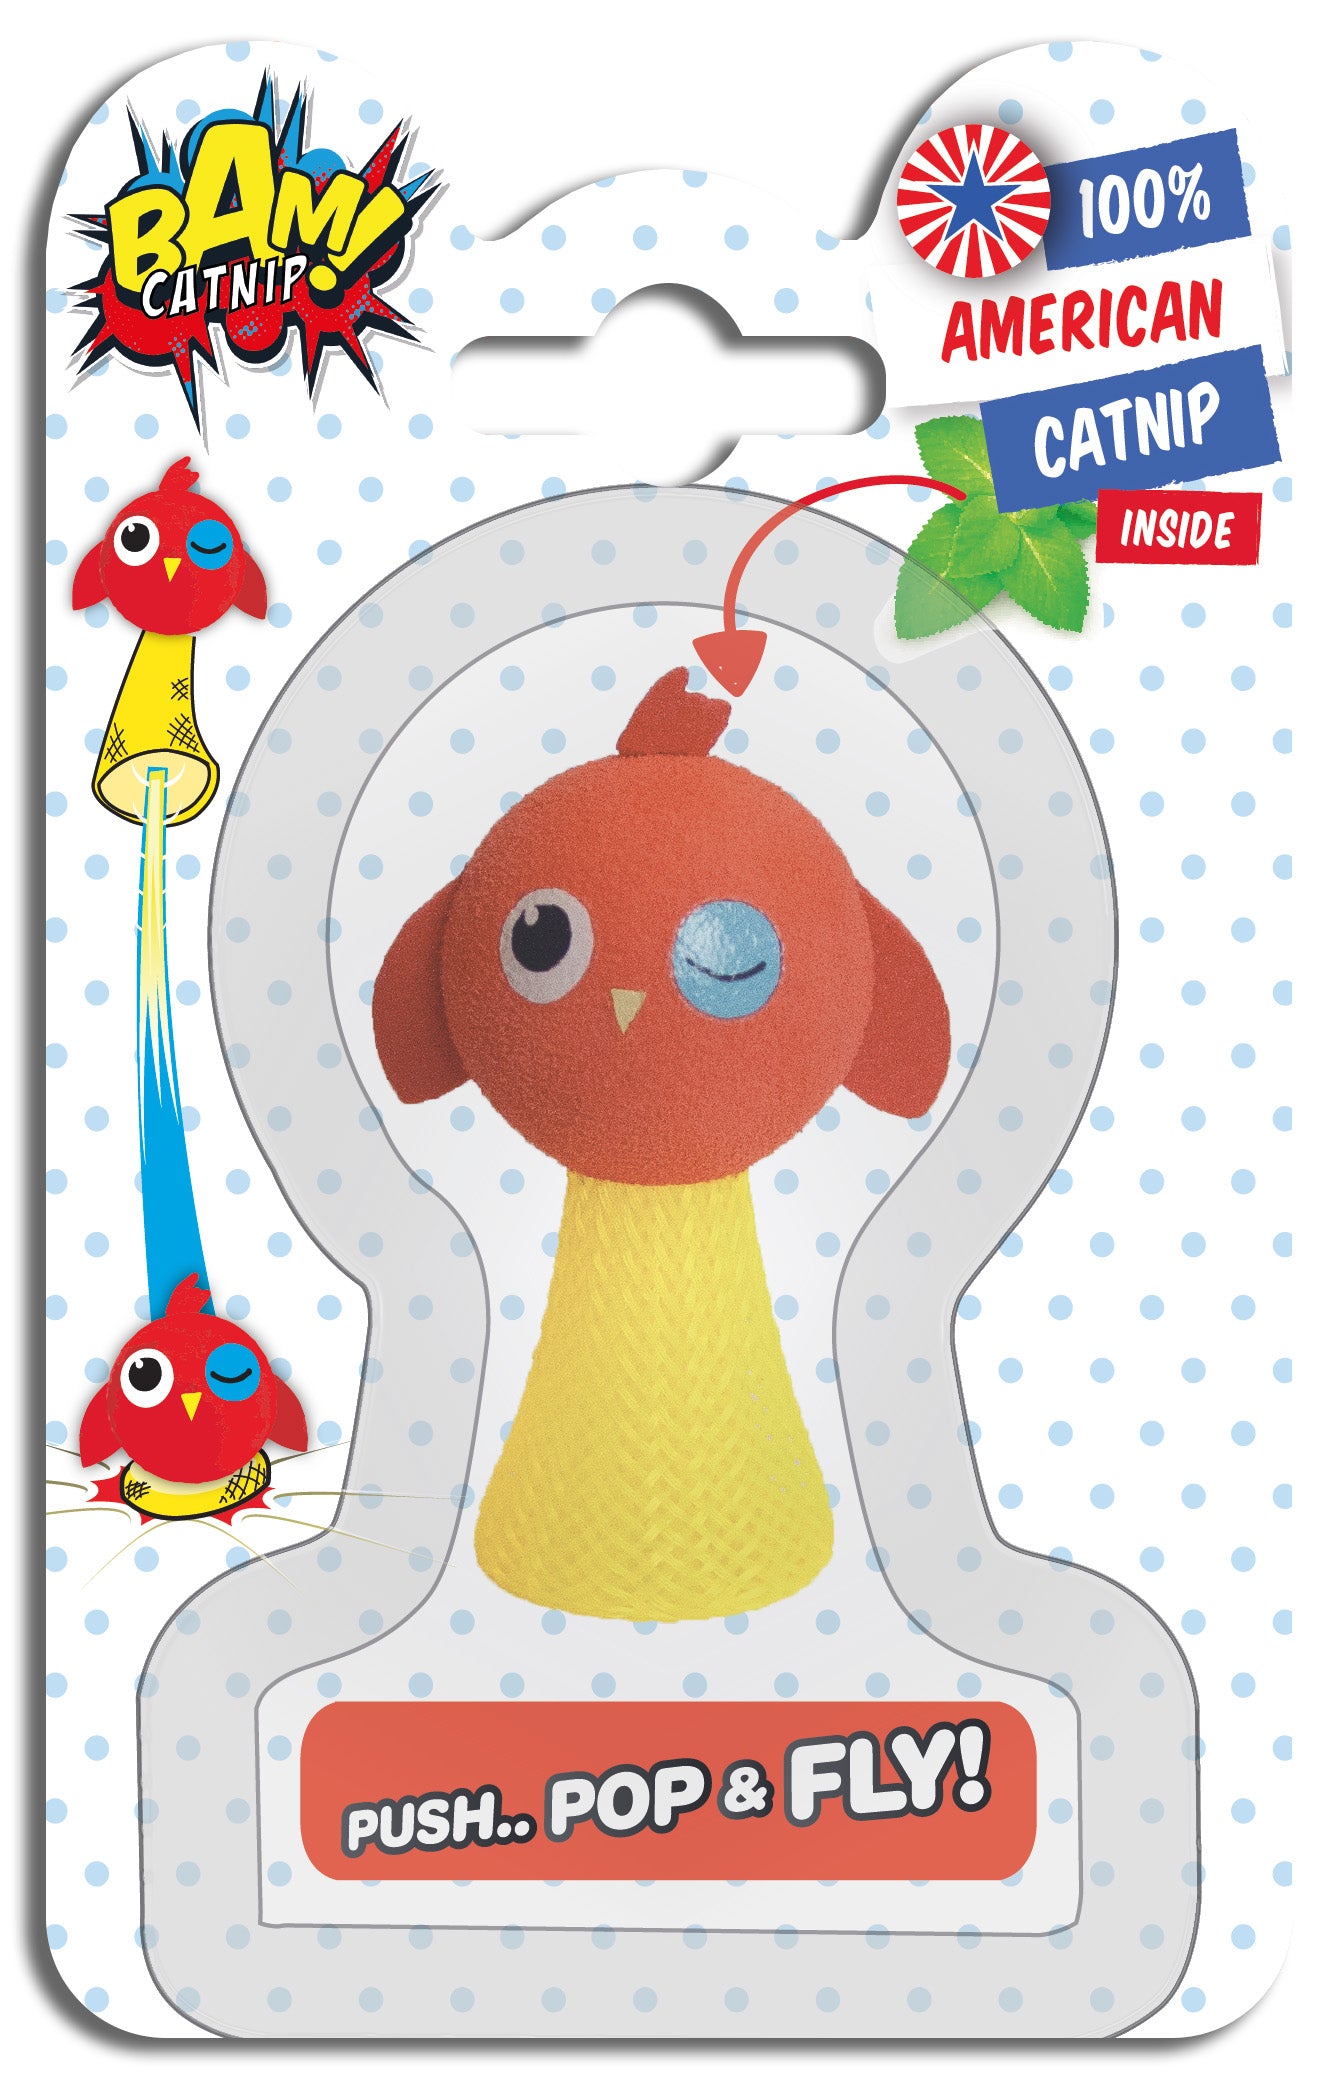 BAM! Catnip Pop and Fly Cat Toy